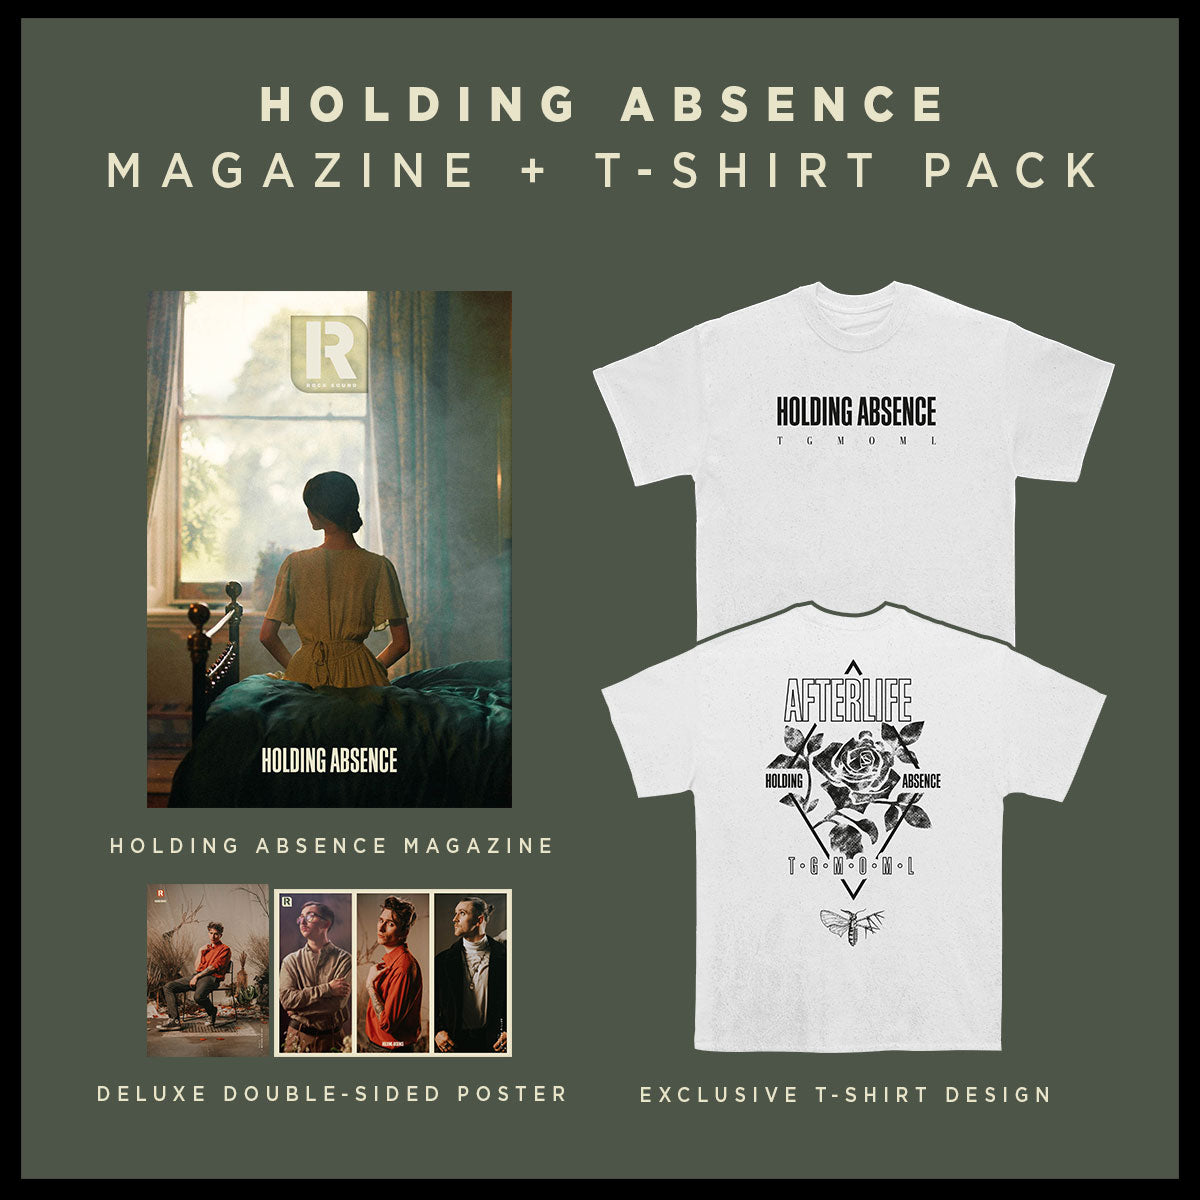 Shop the best deals on Holding Absence magazines, merch and posters in the Rock Sound store